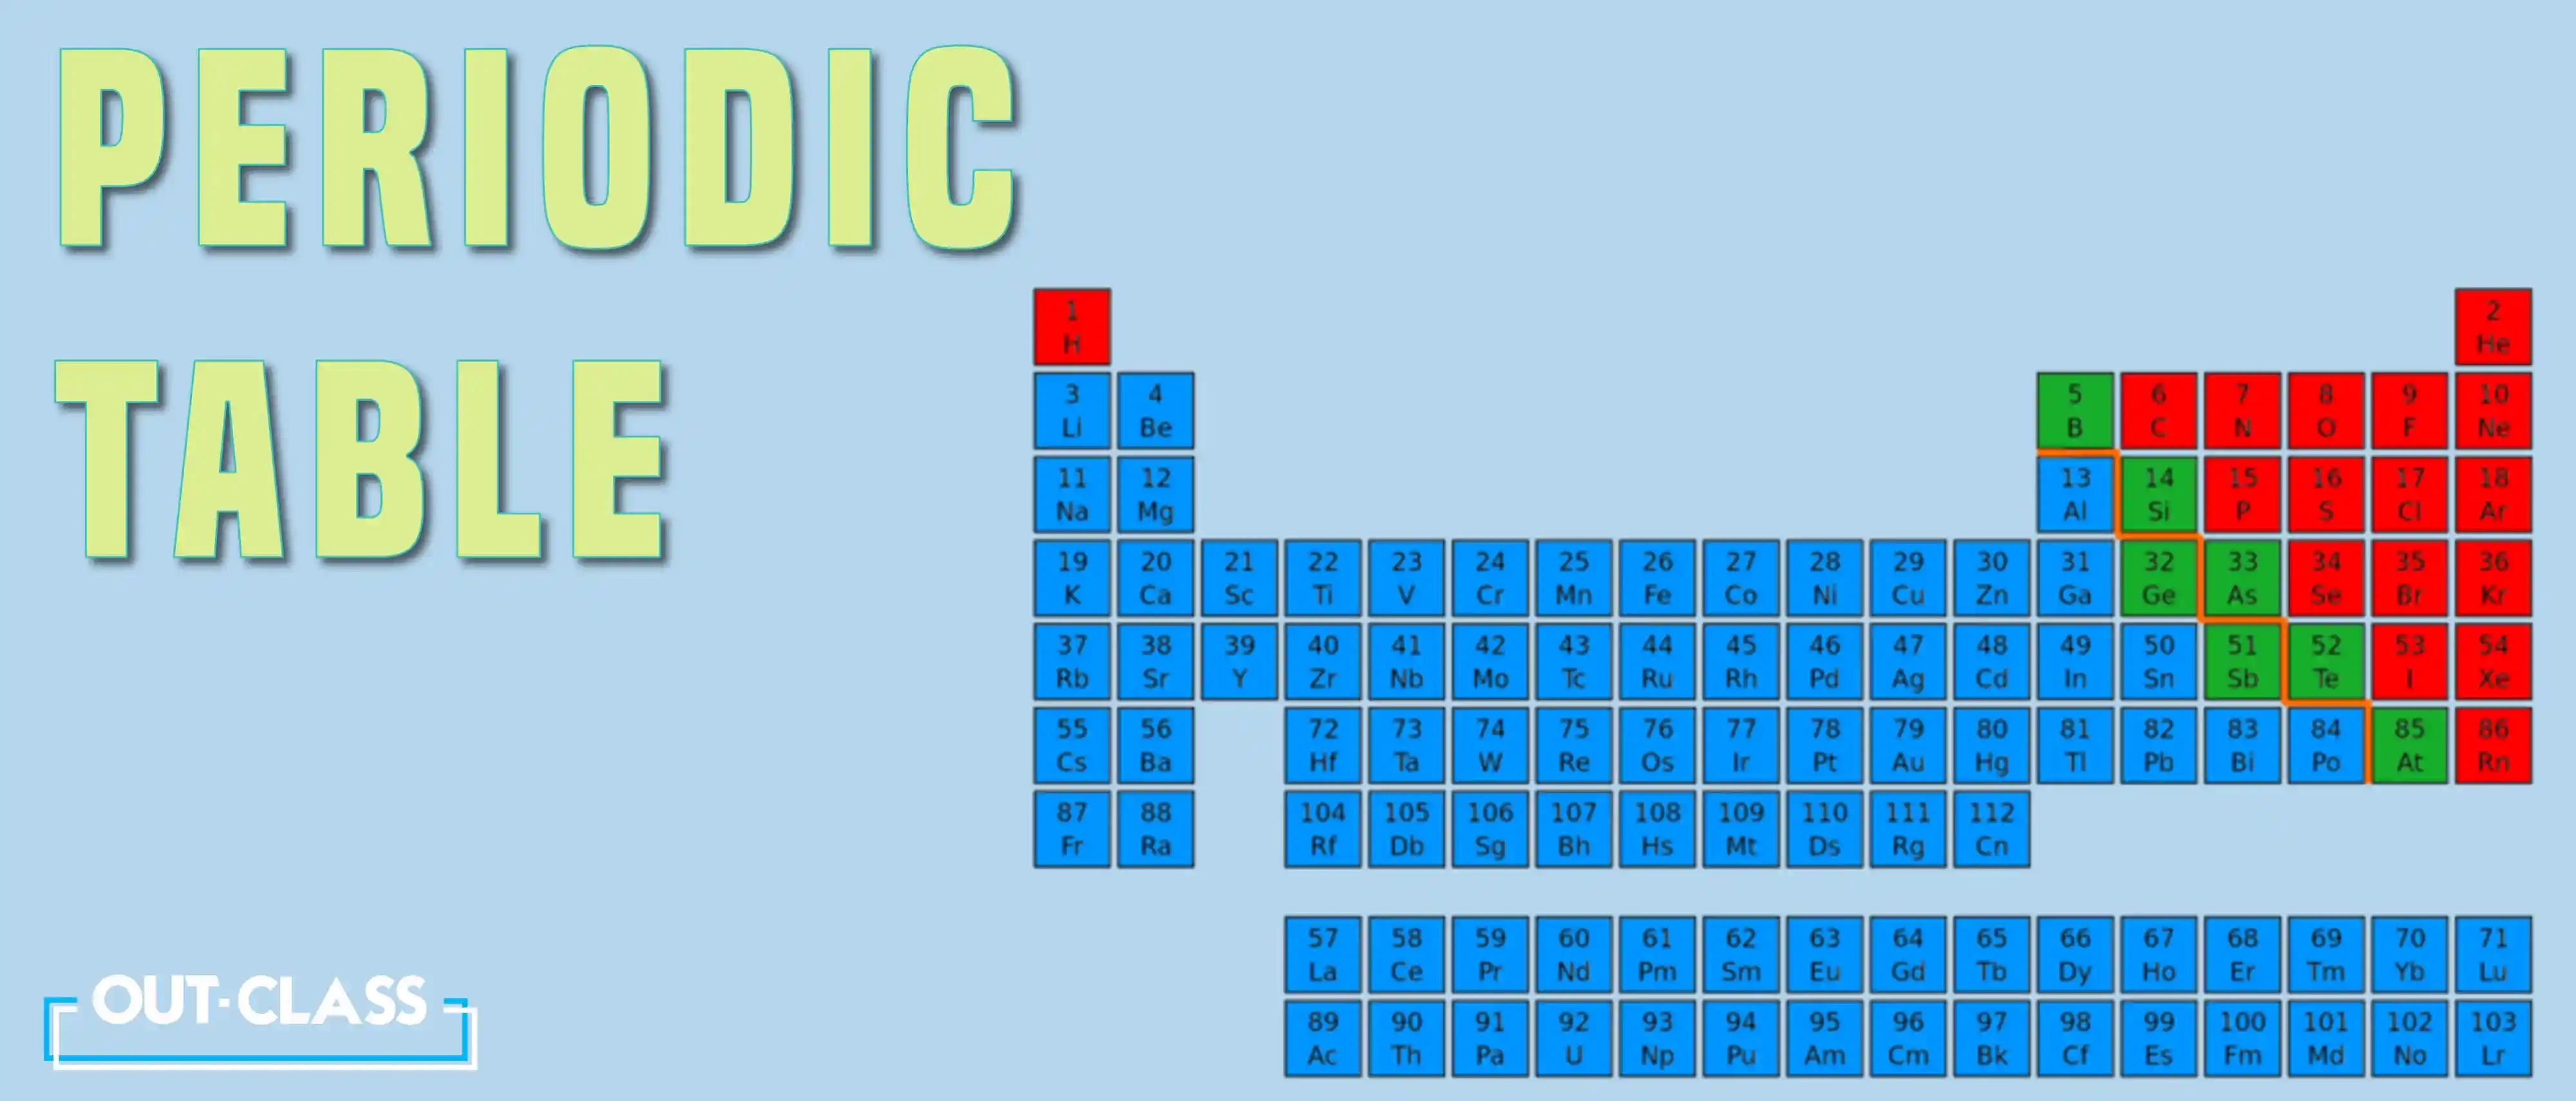 The periodic table illustrates an element which is a pure substance as it consists of only one type of atom. Each period in the periodic table corresponds to an increase in the atomic number, moving from left to right and top to bottom.   The columns, known as groups or families, contain elements with similar chemical behaviors.